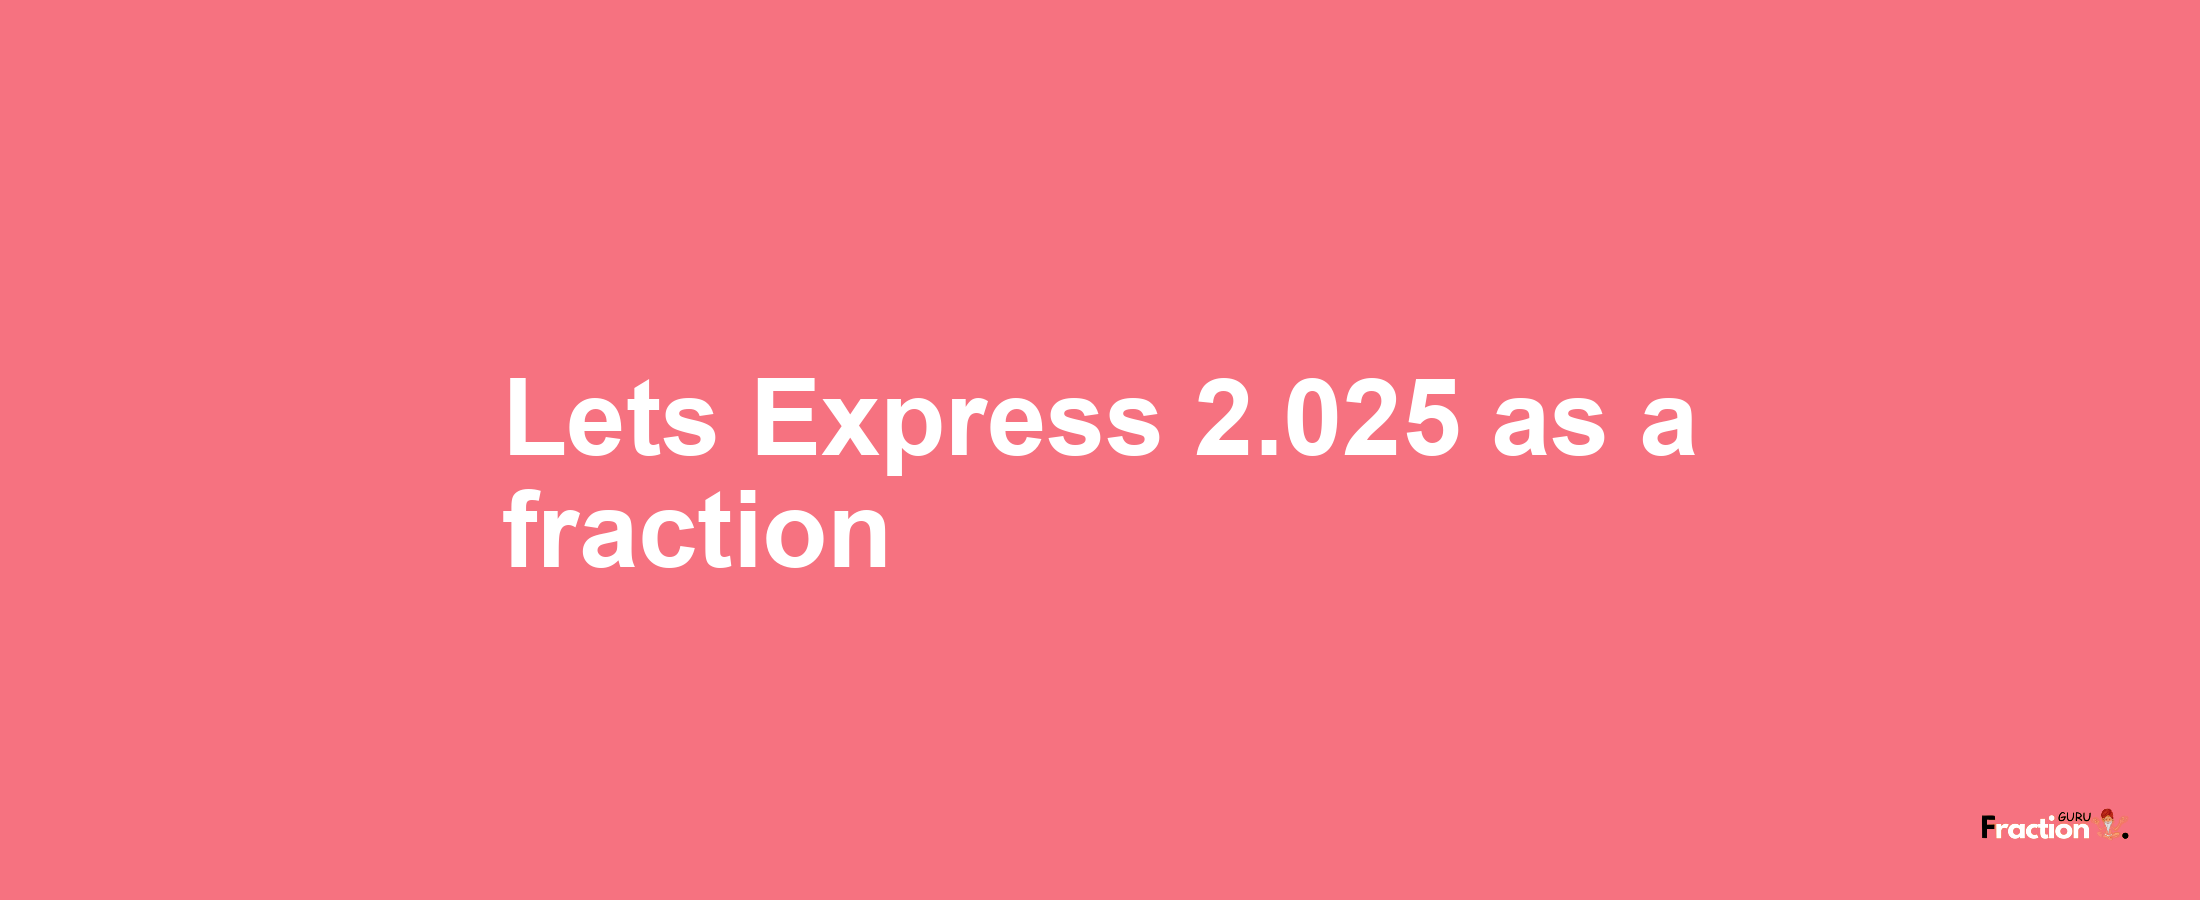 Lets Express 2.025 as afraction